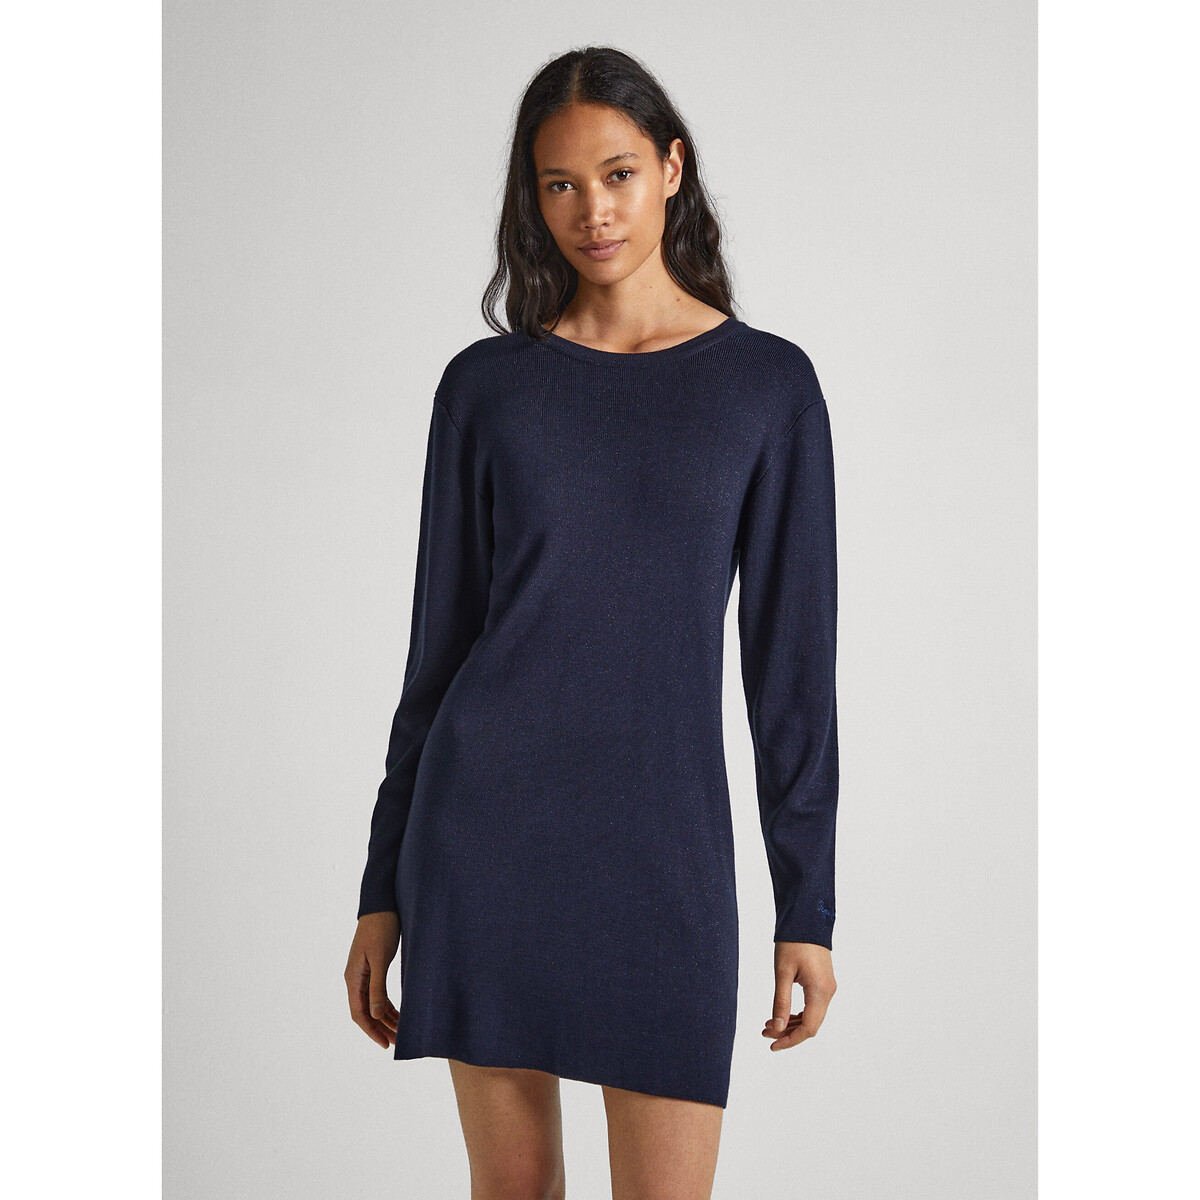 Sparkly mini jumper dress with v-neck, navy, Pepe Jeans | La Redoute